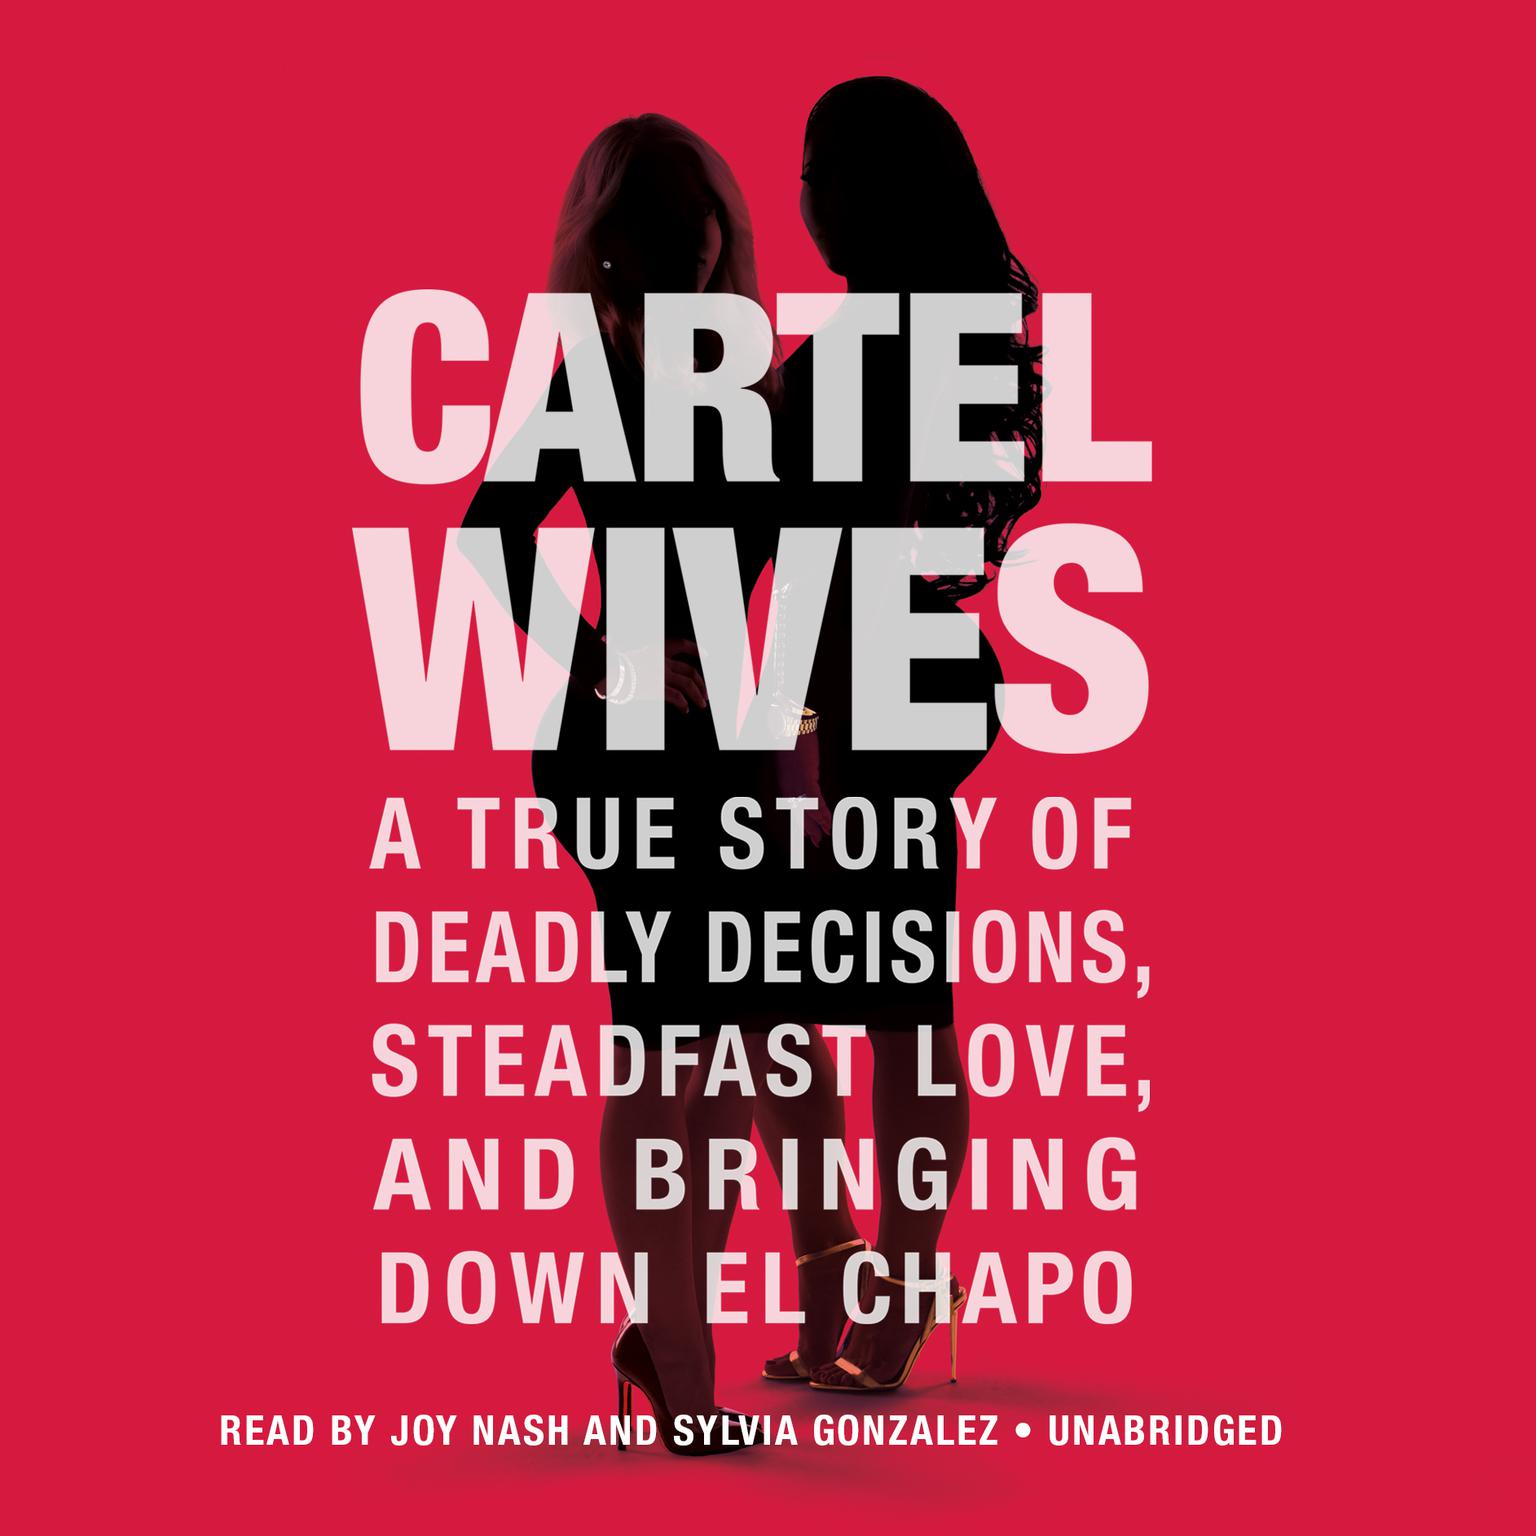 Cartel Wives: A True Story of Deadly Decisions, Steadfast Love, and Bringing Down El Chapo Audiobook, by Mia Flores